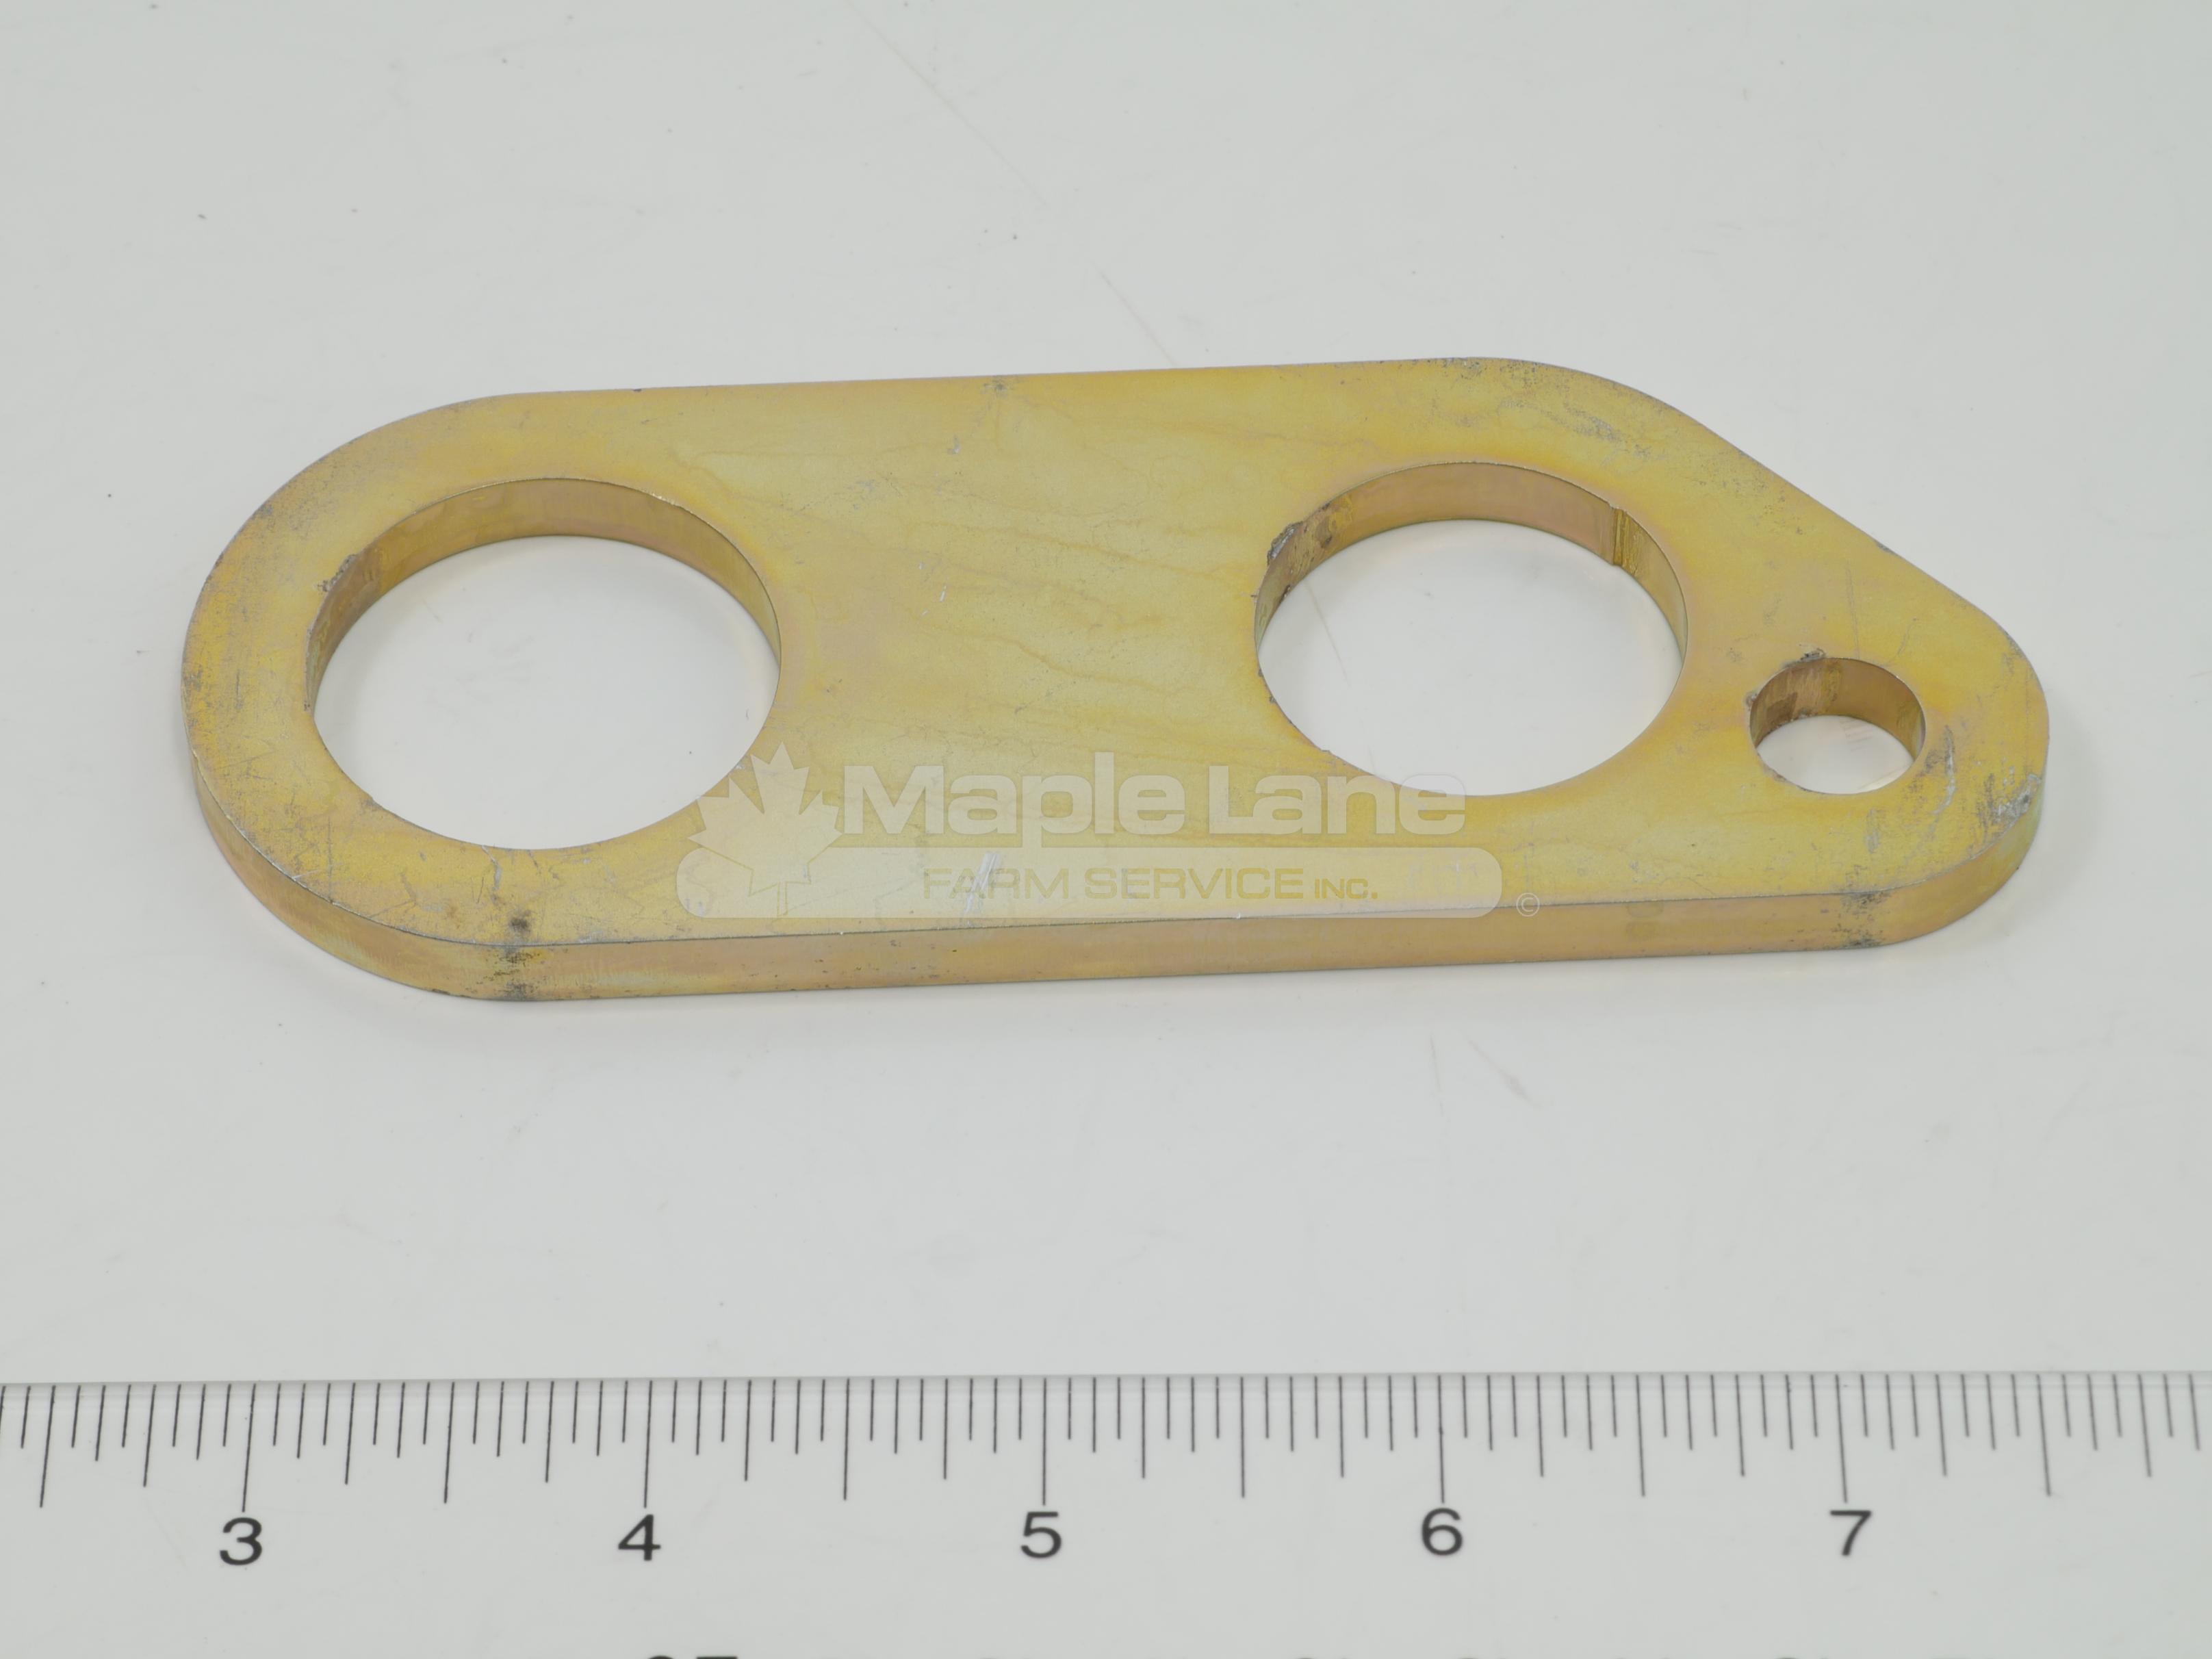 183570 Latch Link Plate